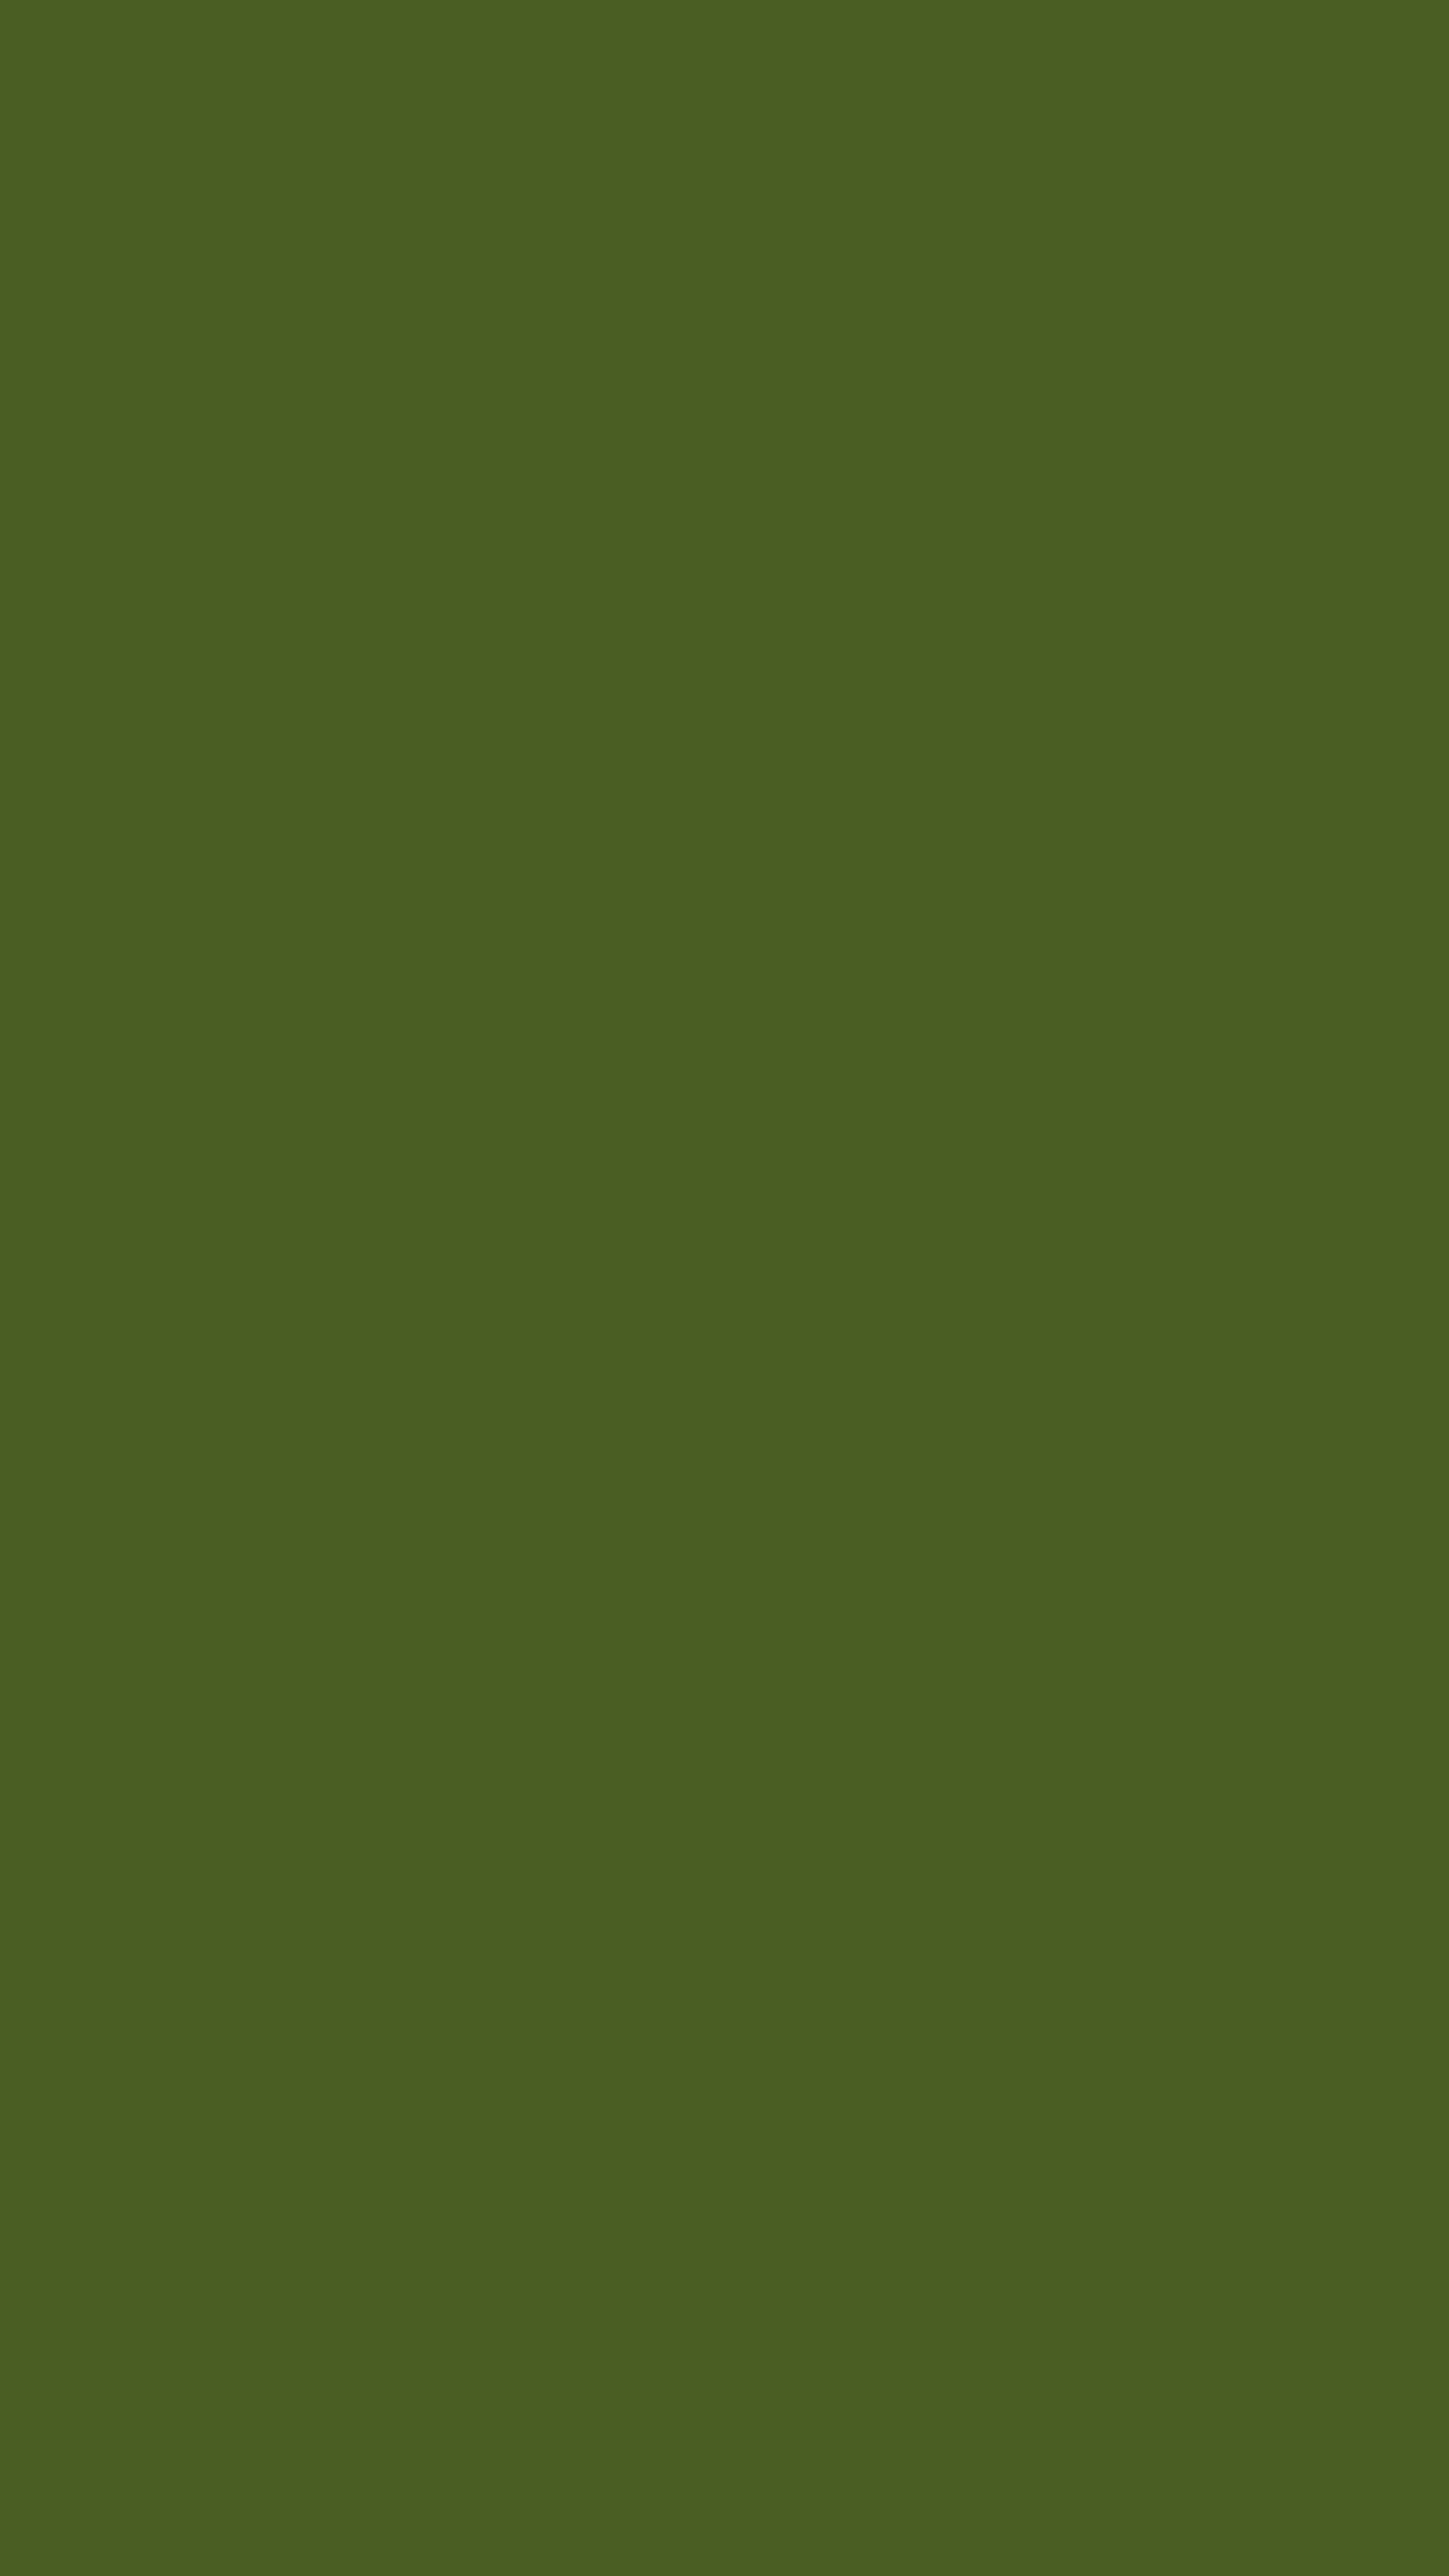 2160x3840 Dark Moss Green Solid Color Background Wallpaper for Mobile Phone